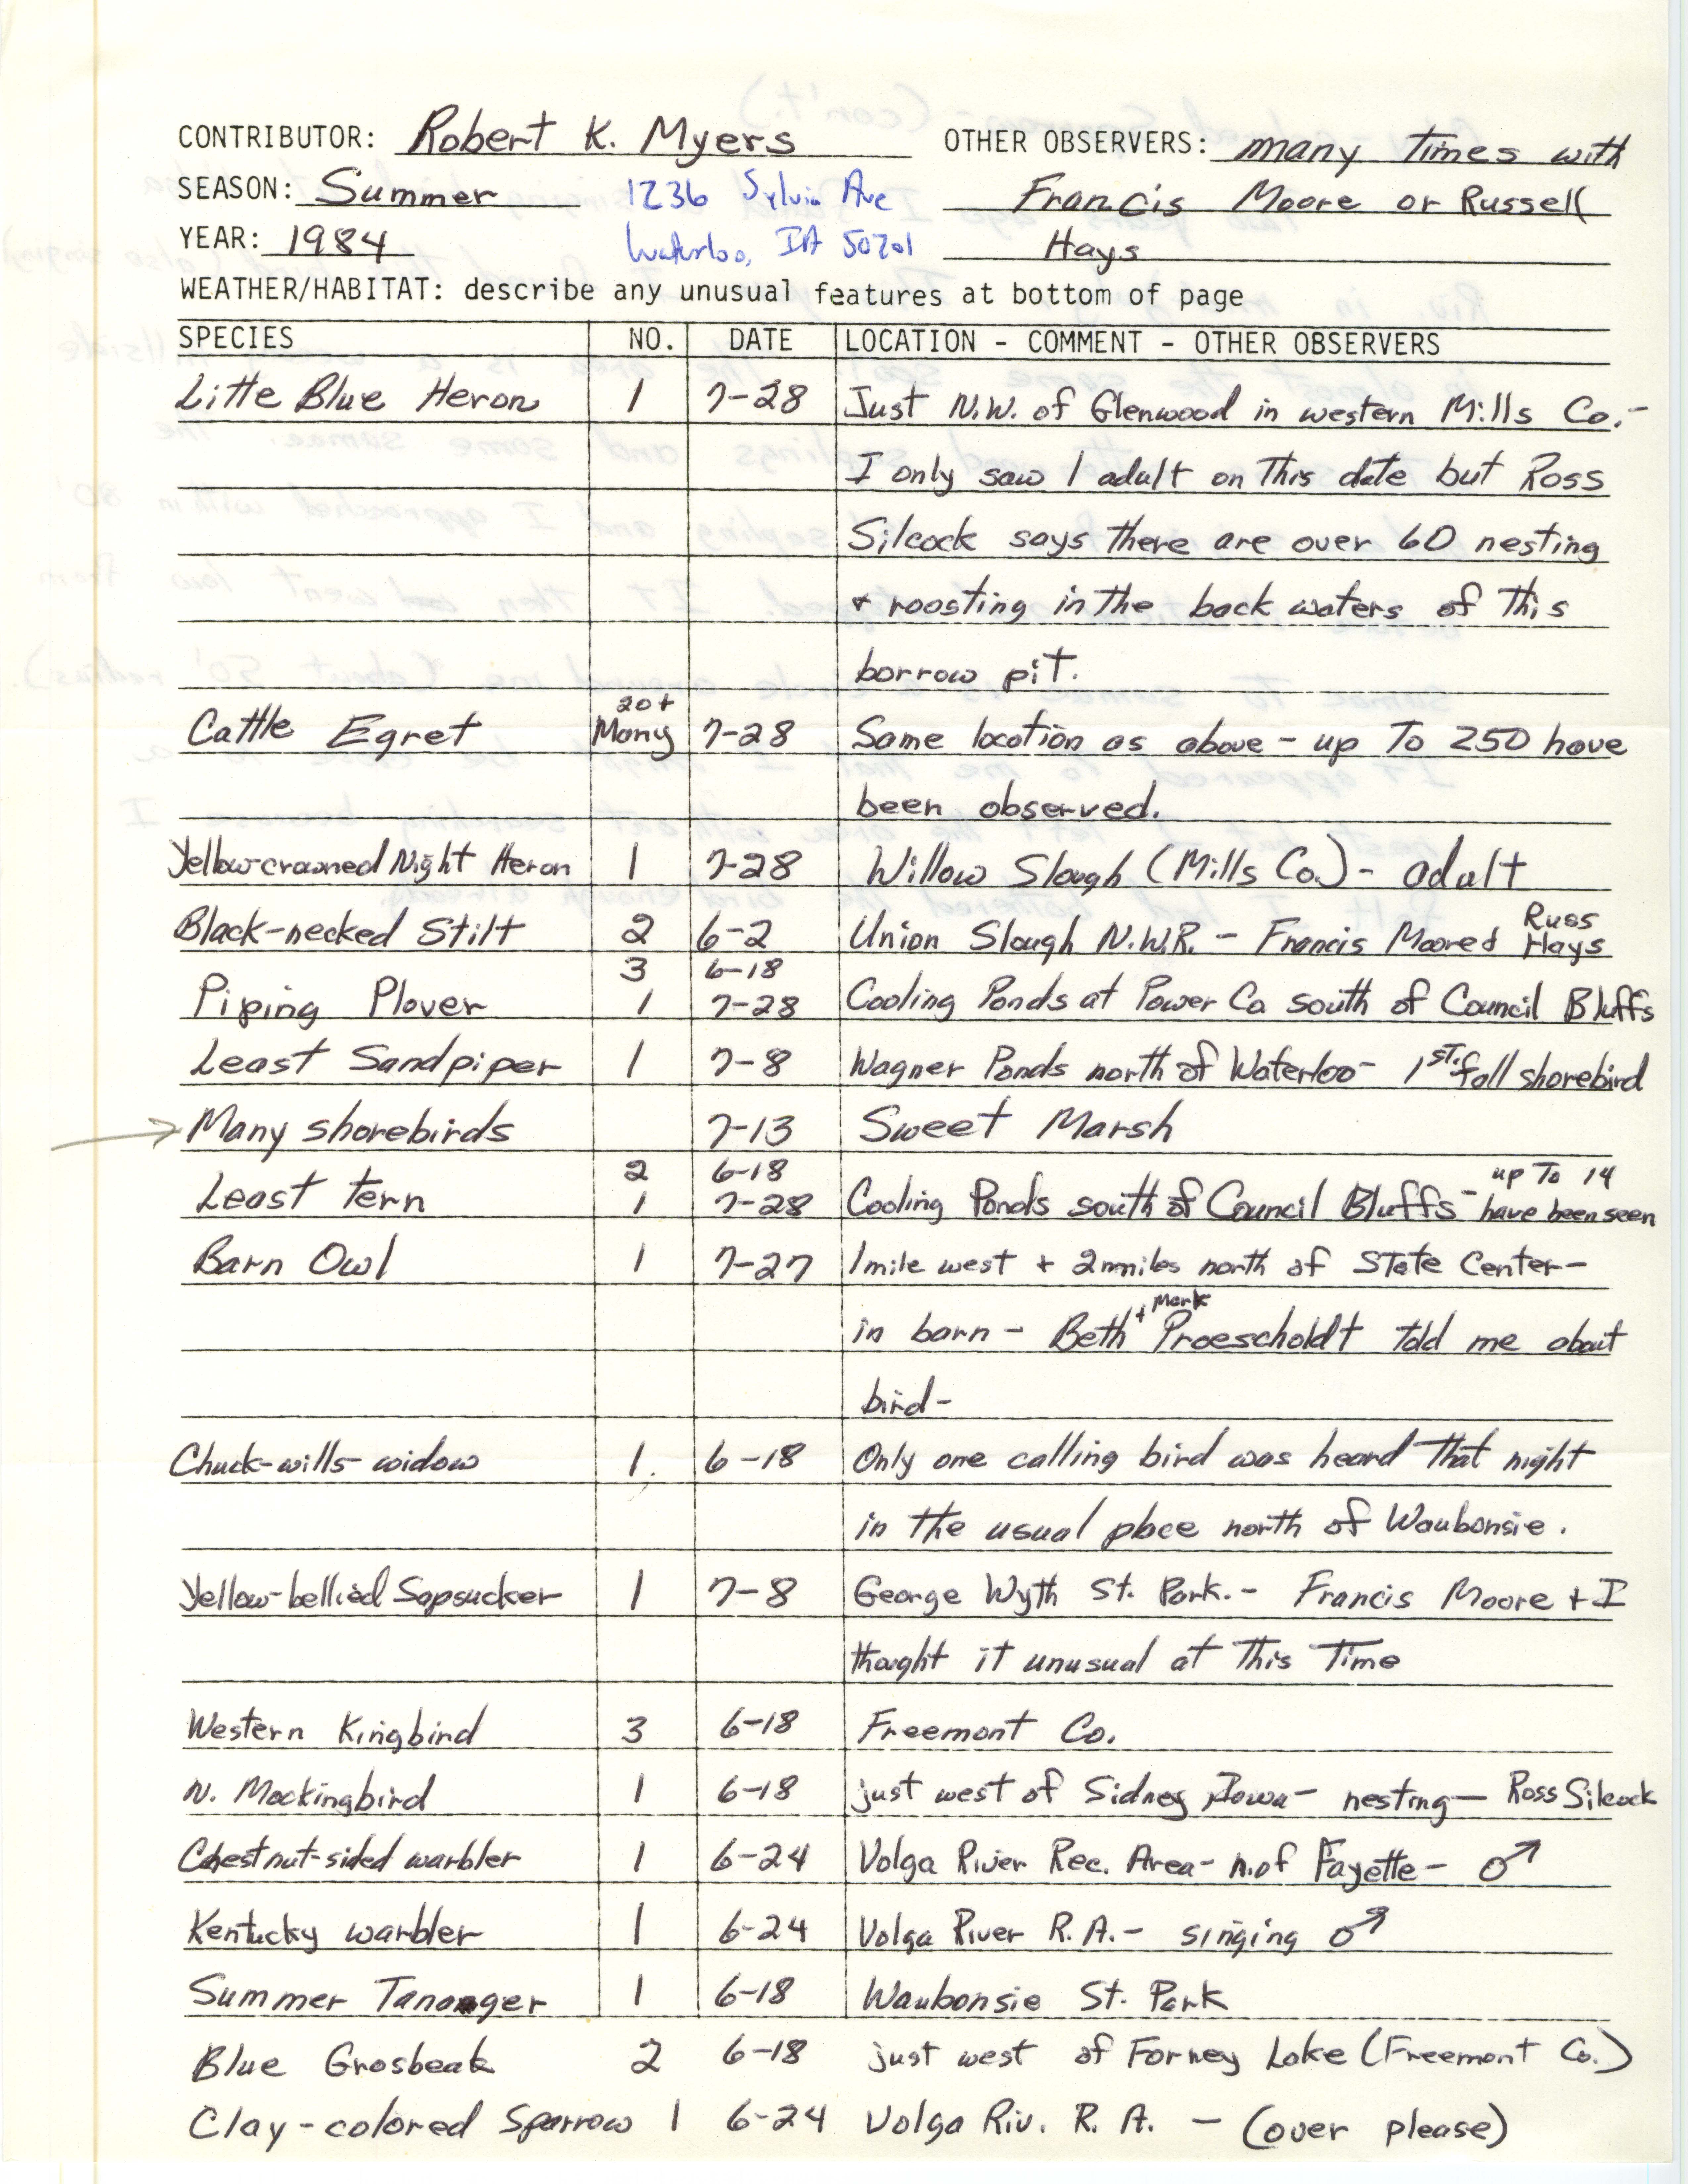 Field notes contributed by Robert K. Myers, summer 1984